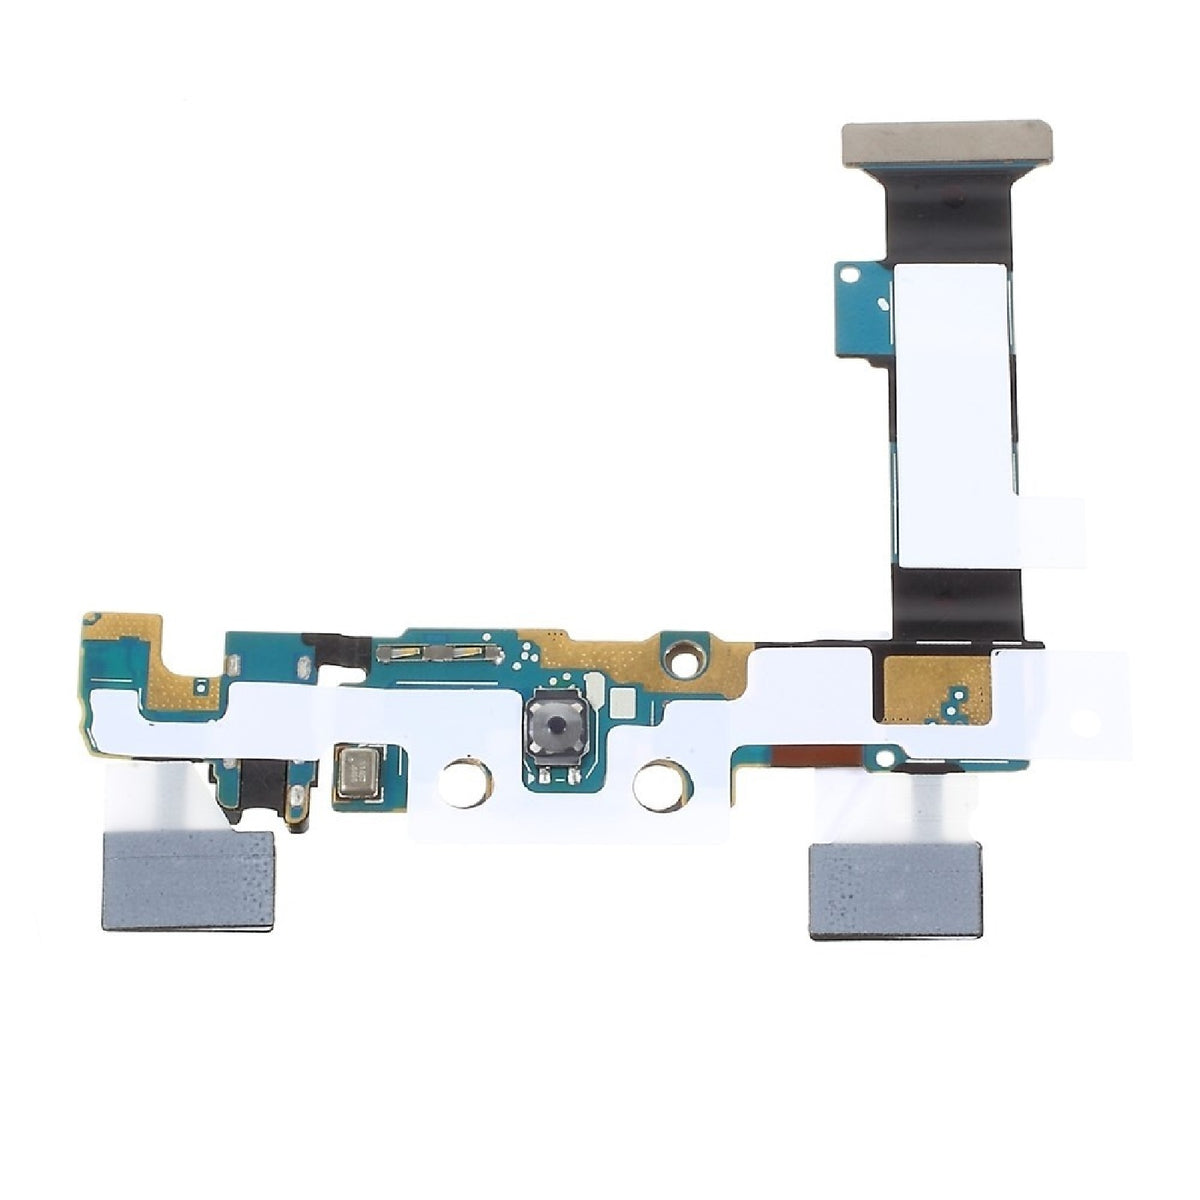 For Samsung Galaxy S6 Edge Plus G928F Charging Port Dock Connector Hea –  